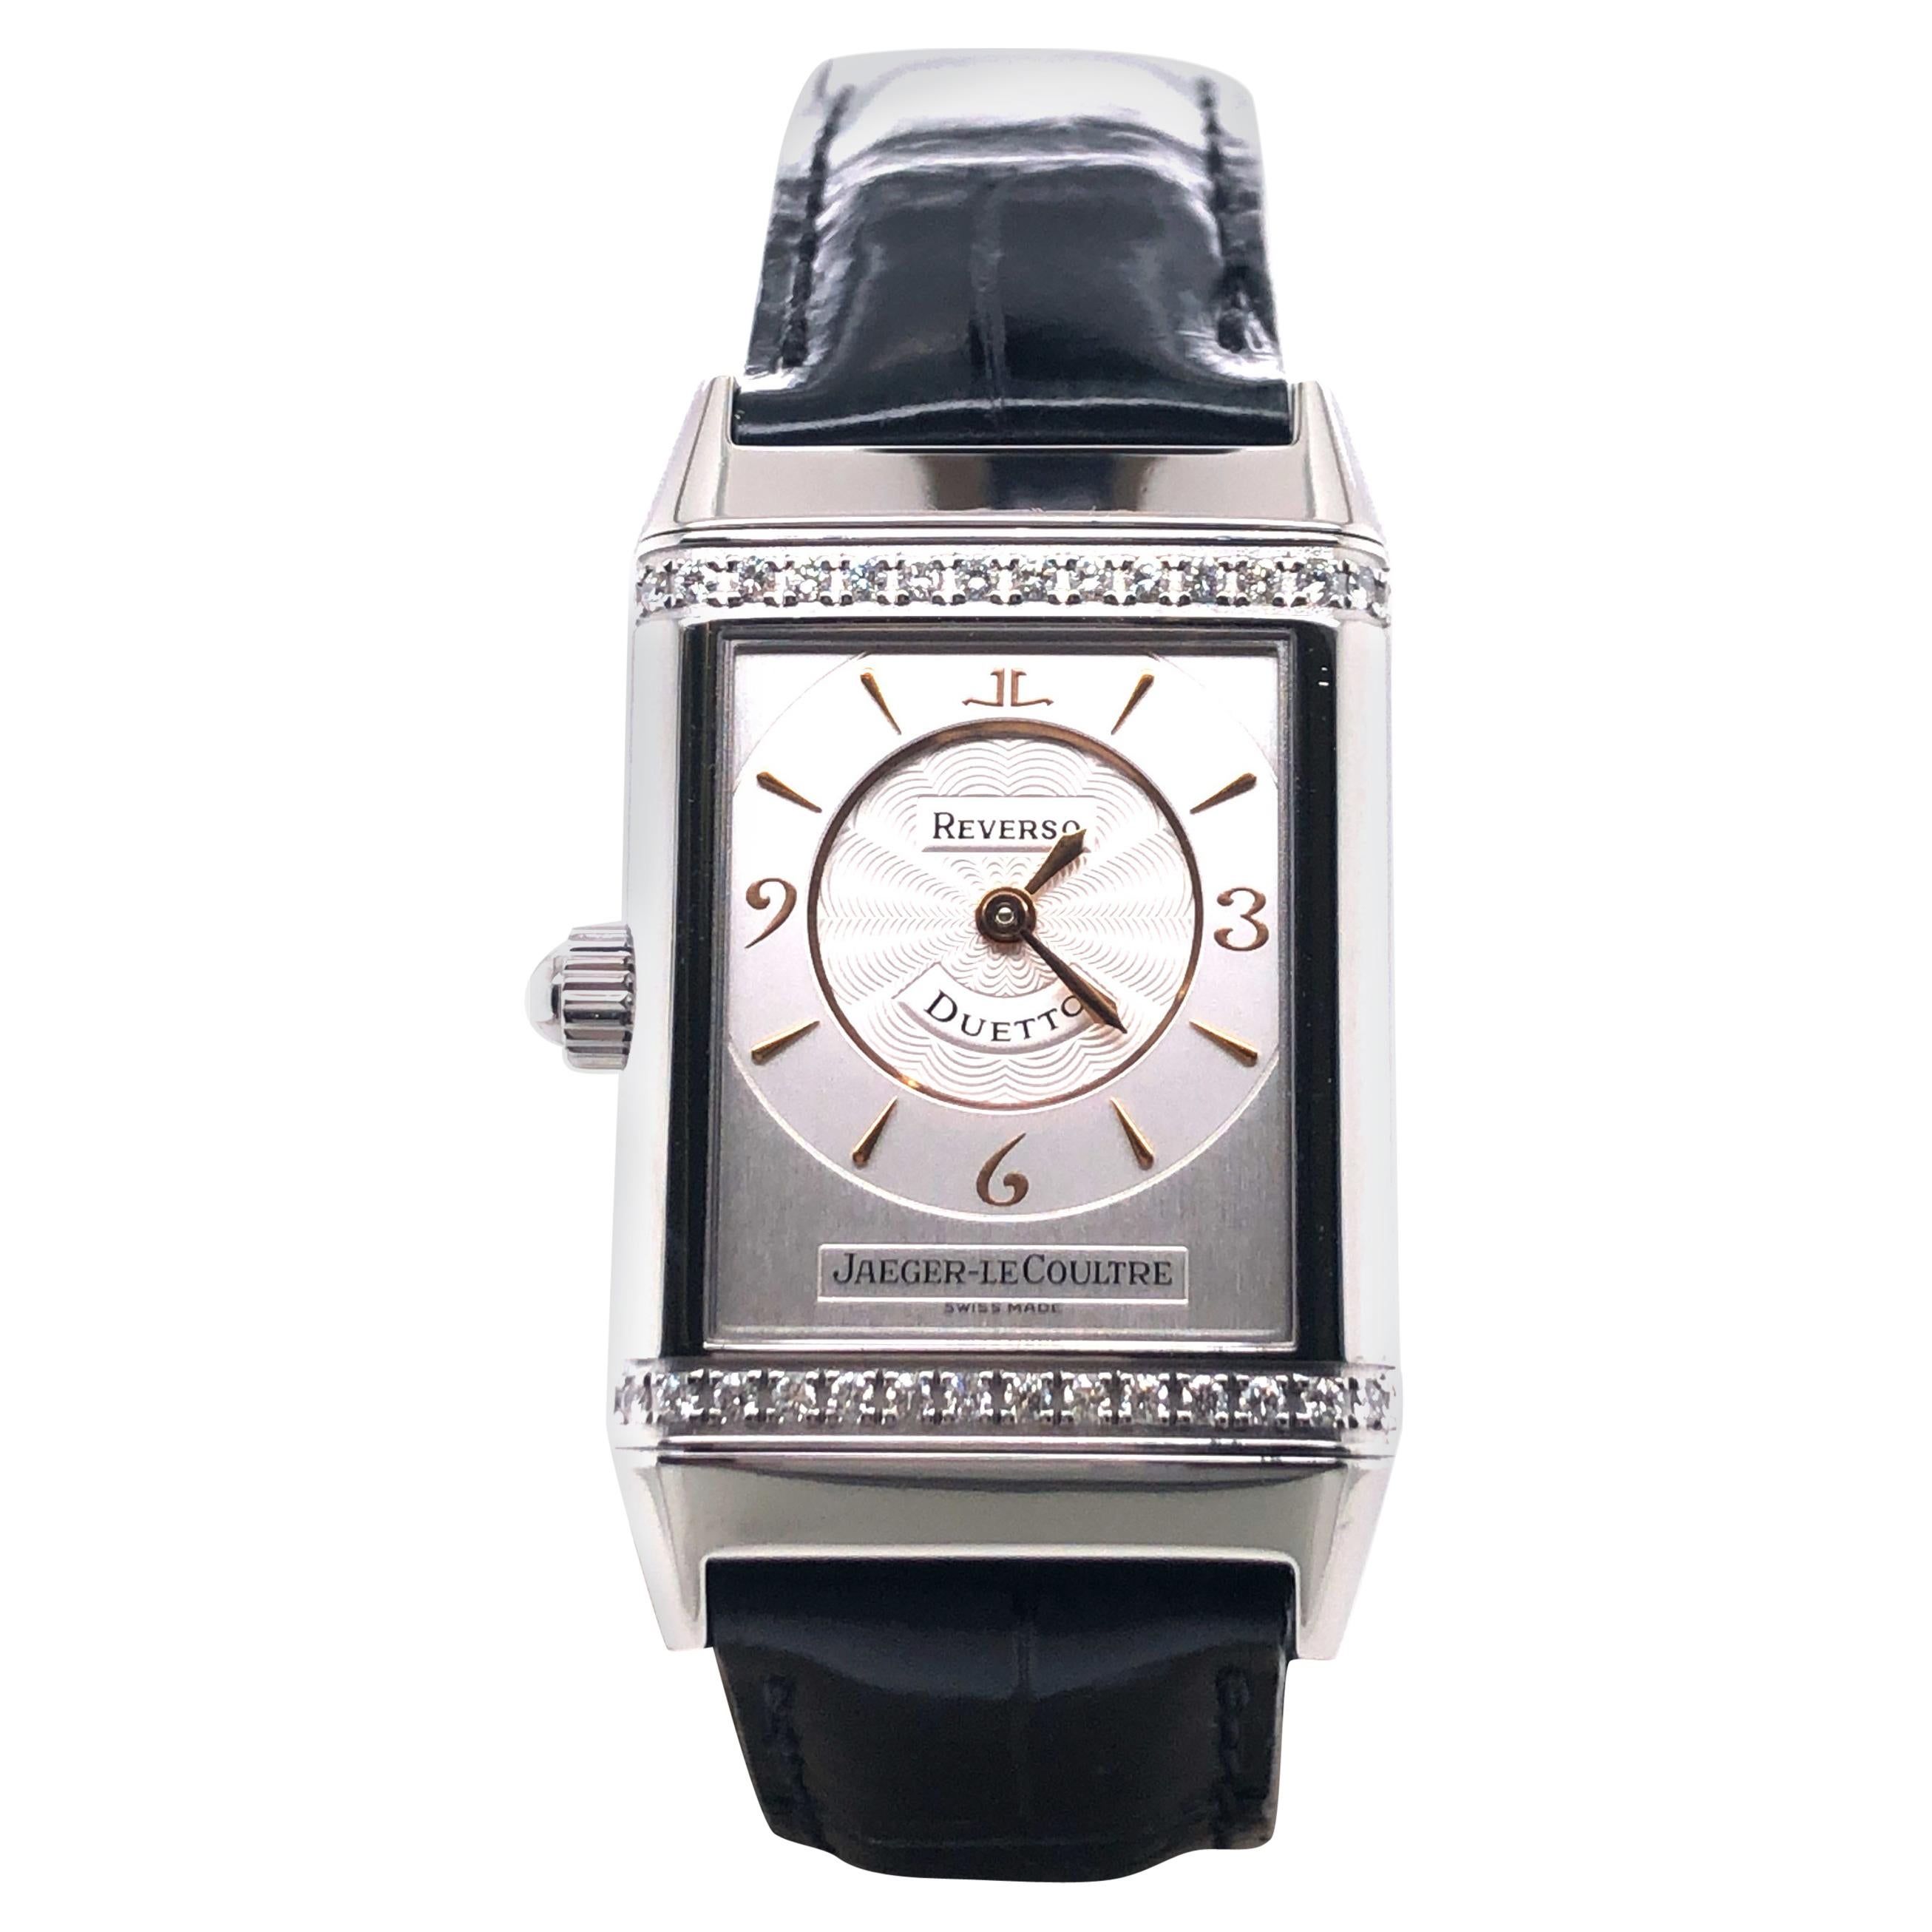 Jaeger-LeCoultre Reverso-Duetto Ladies Watch in Stainless Steel